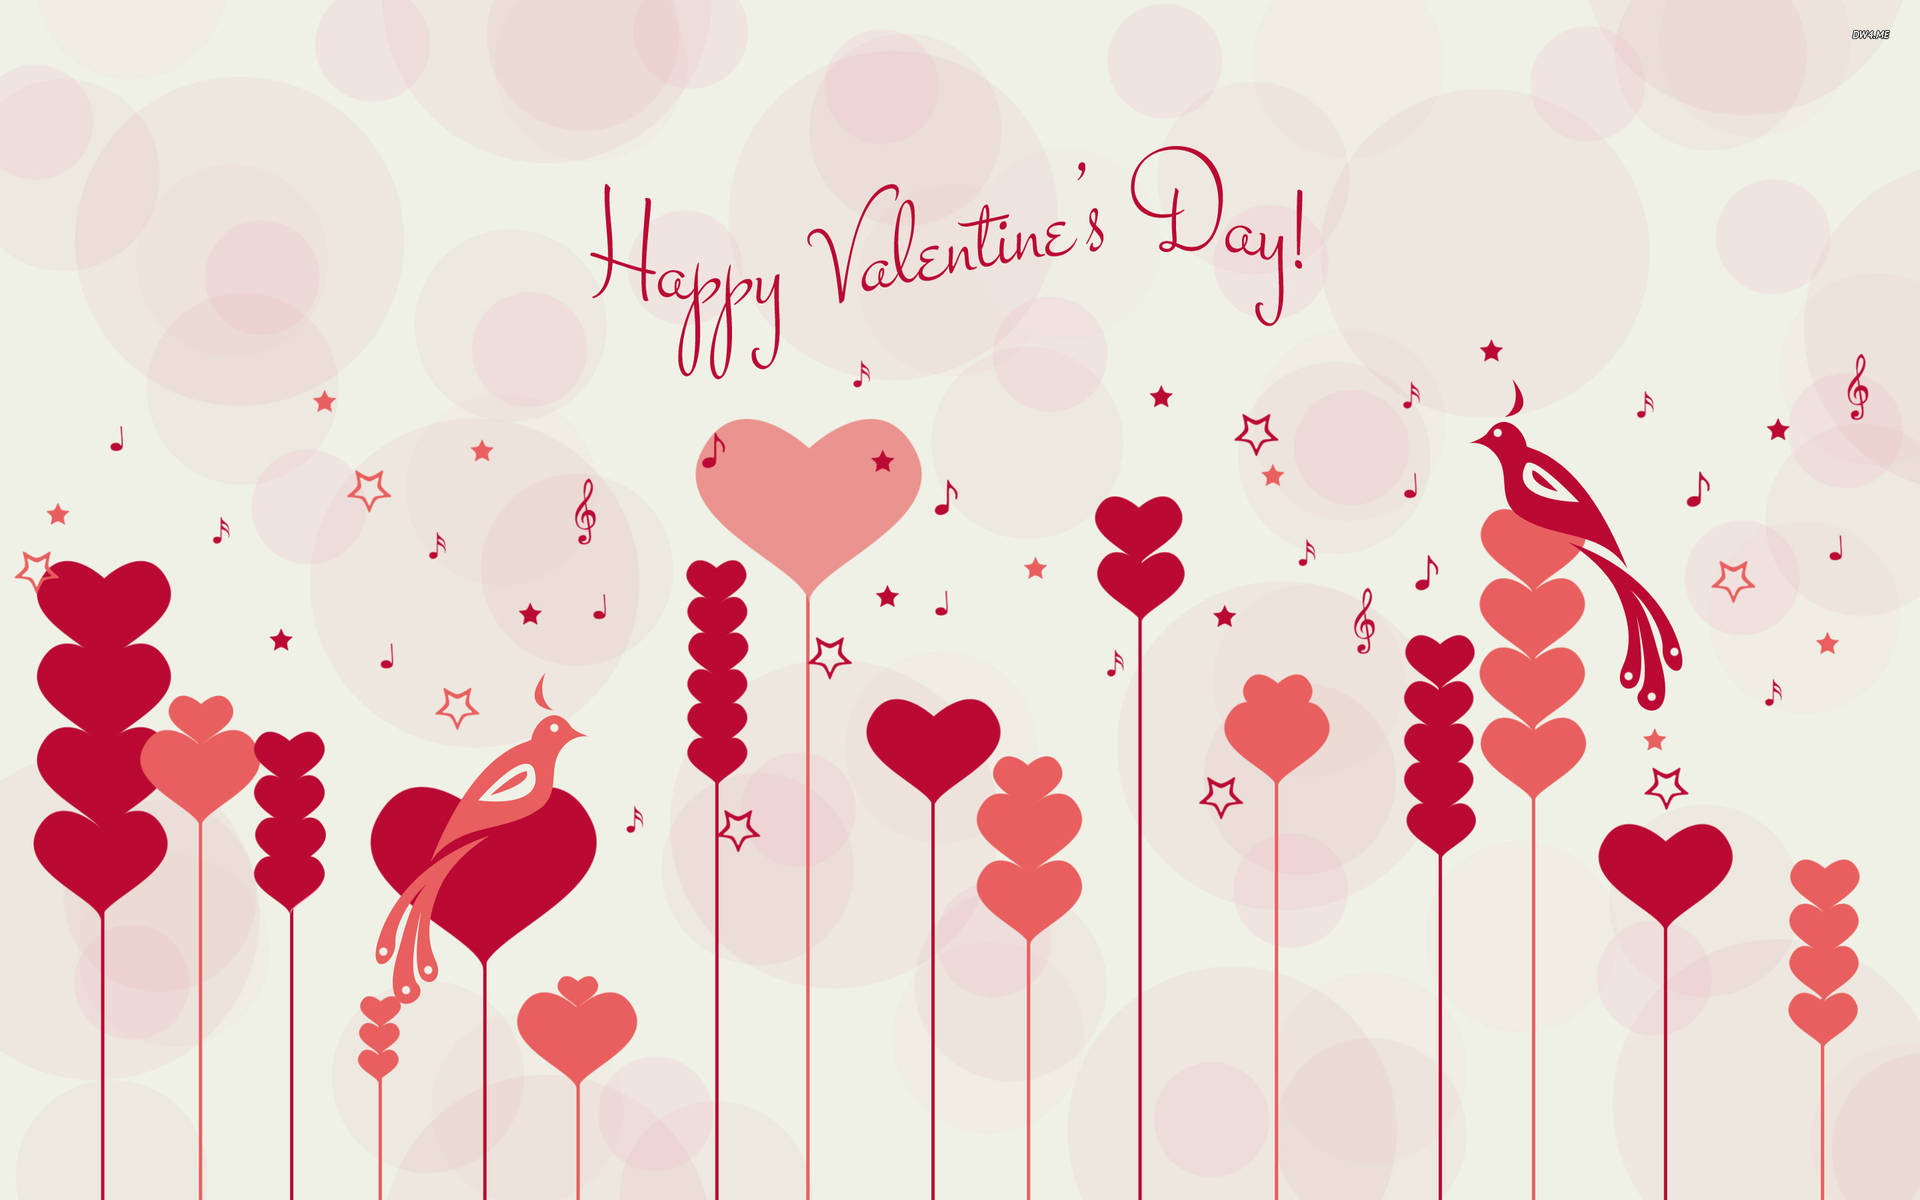 Happy Valentine's Day With Hearts And Lovebirds Background